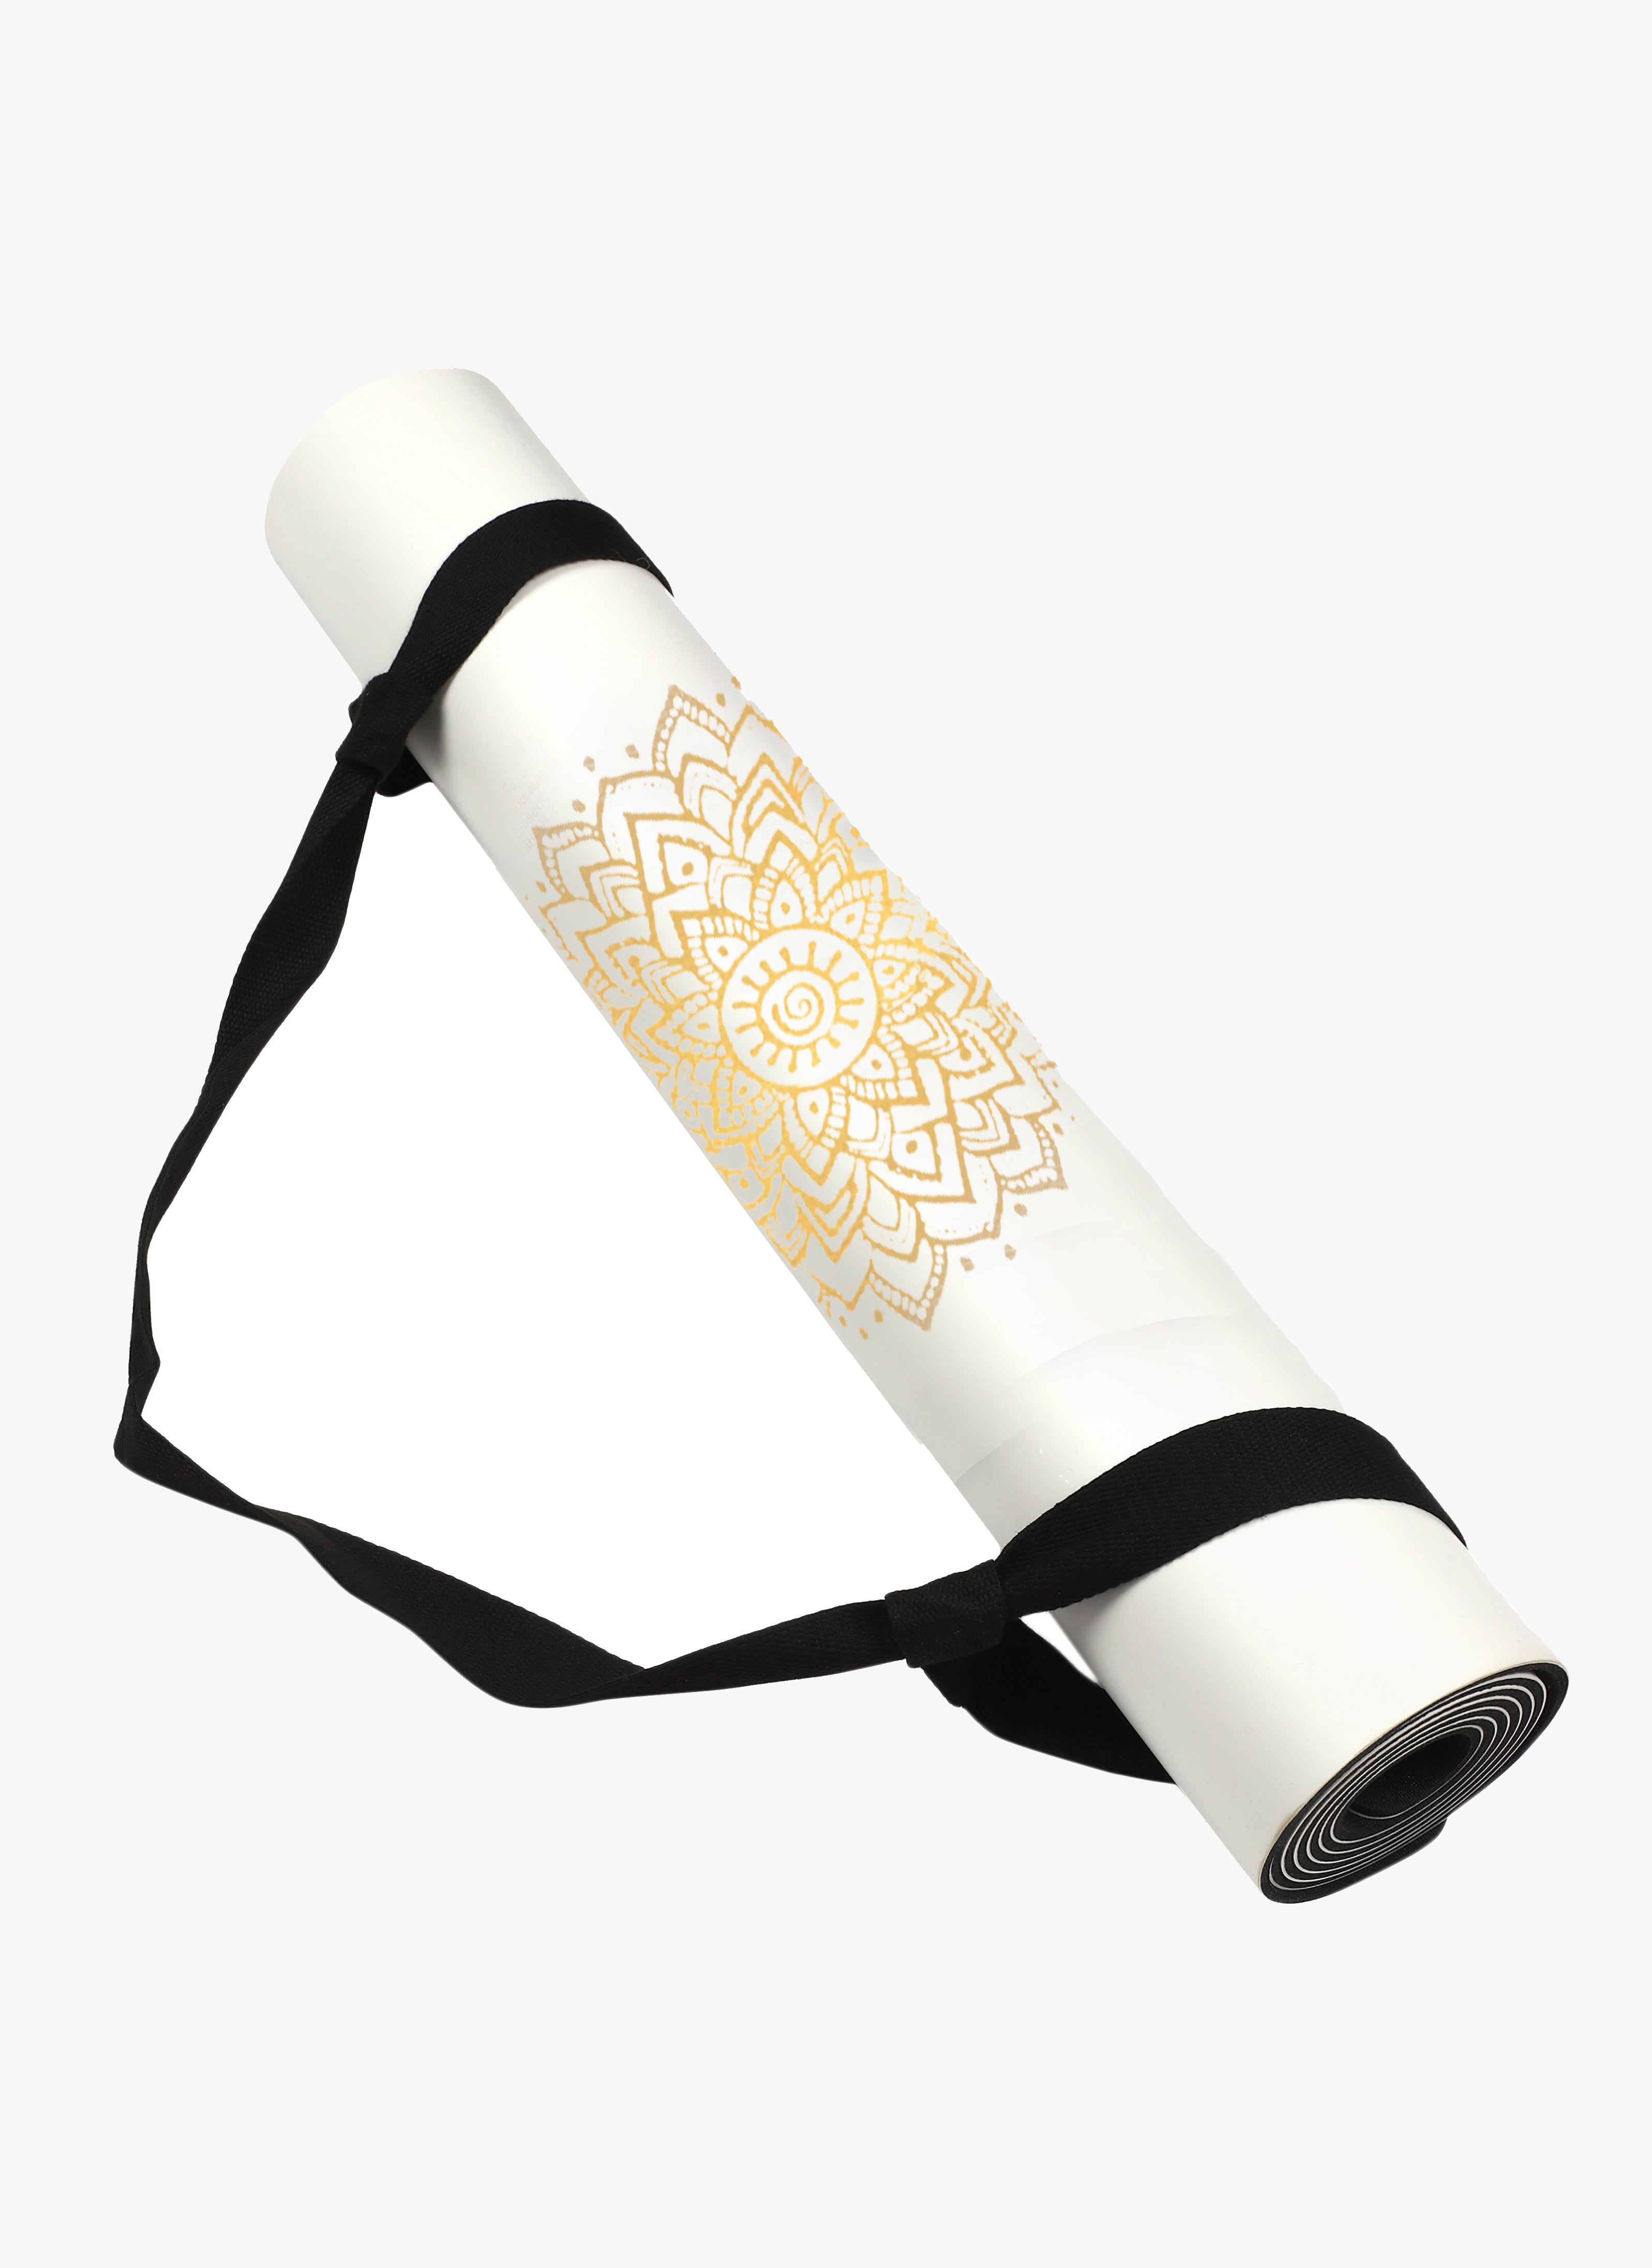 Shakti Warrior Chakra Recycled PU Yoga Mat - Radiant gold chakra design on white surface, luxurious texture, high-density composition for joint support. Eco-friendly, non-slip, perfect for regular and hot yoga.